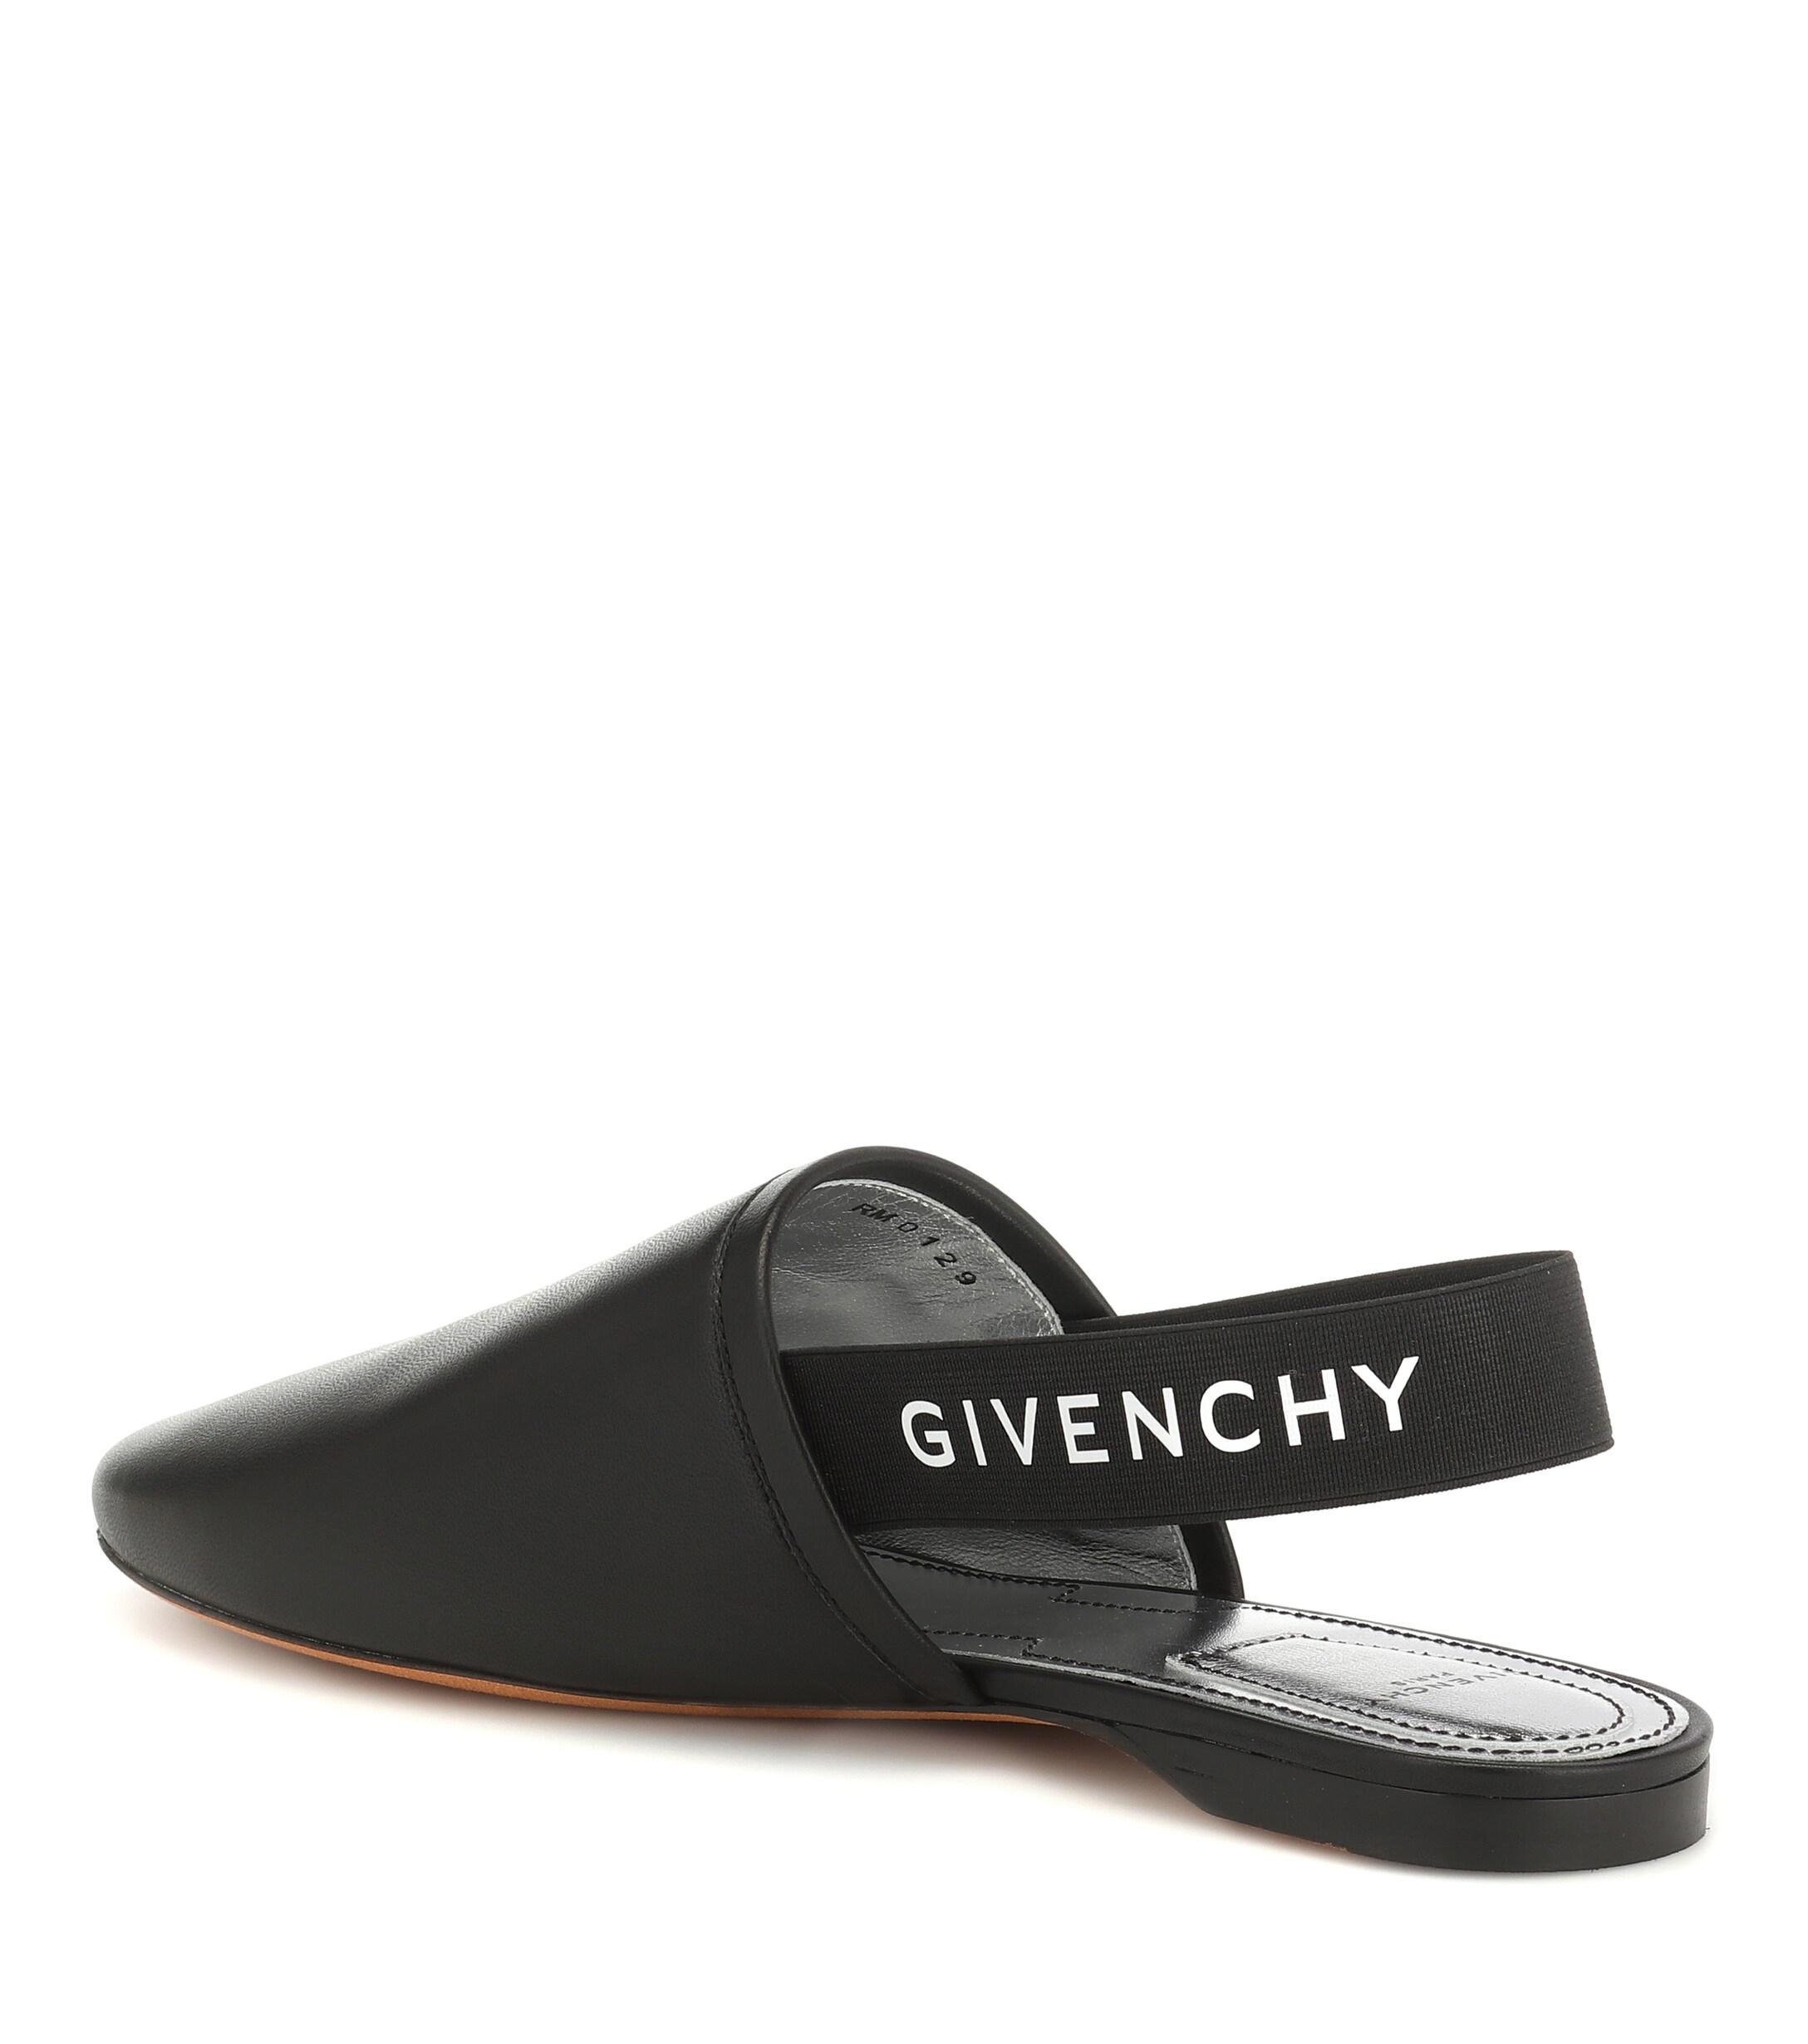 Givenchy Slingback Flat Mules in Black 1 (Black) - Lyst